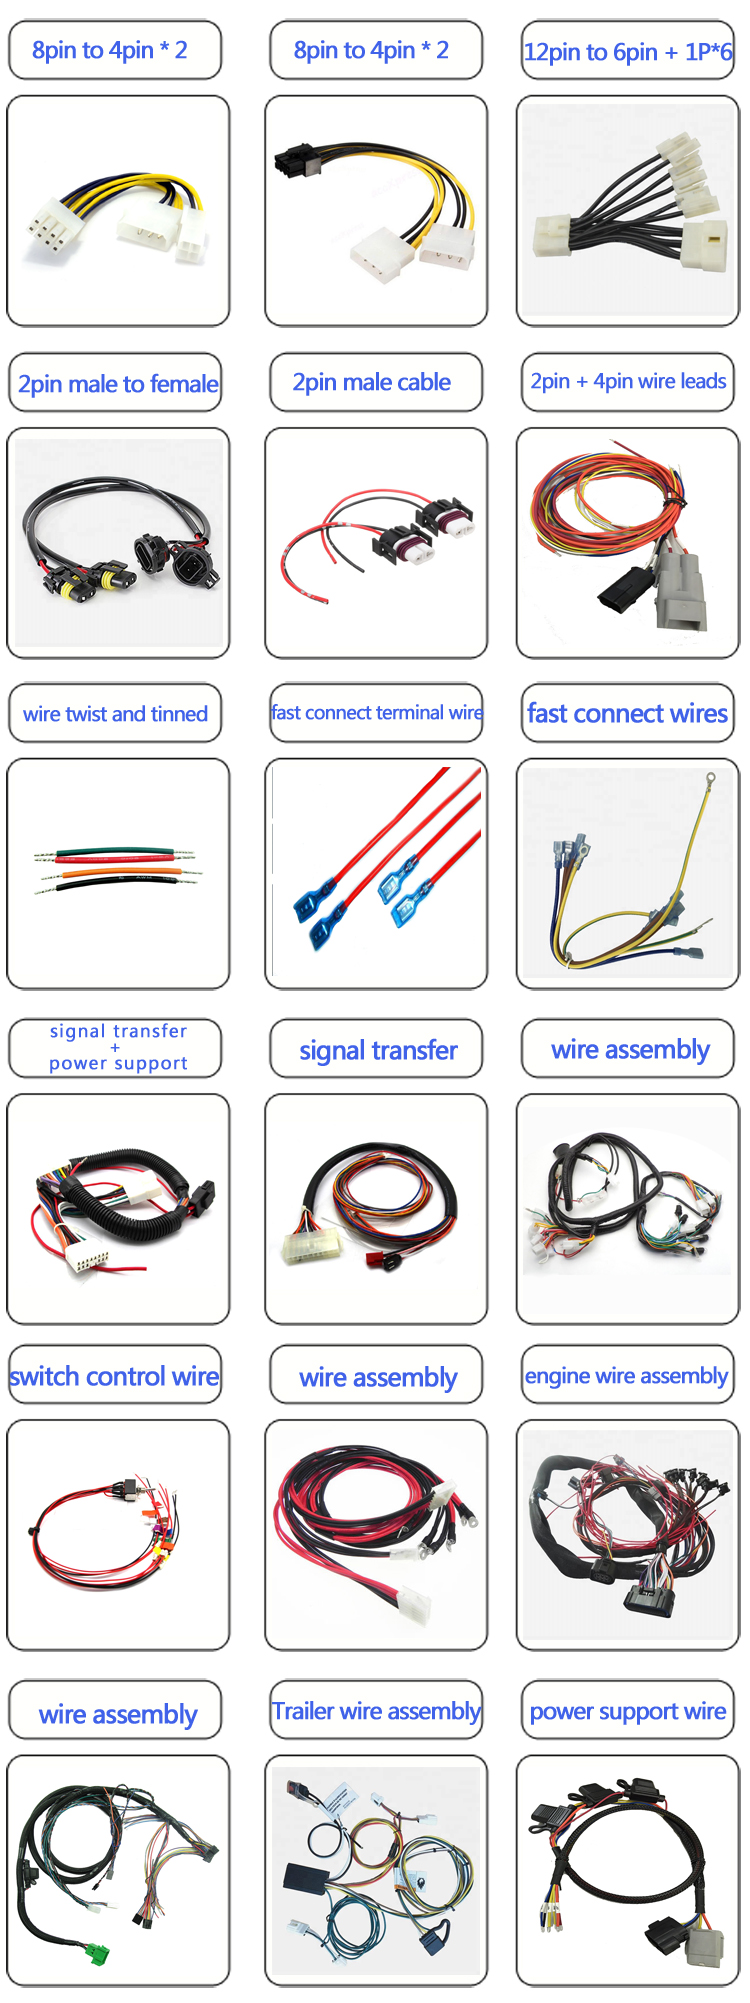 wire assembly